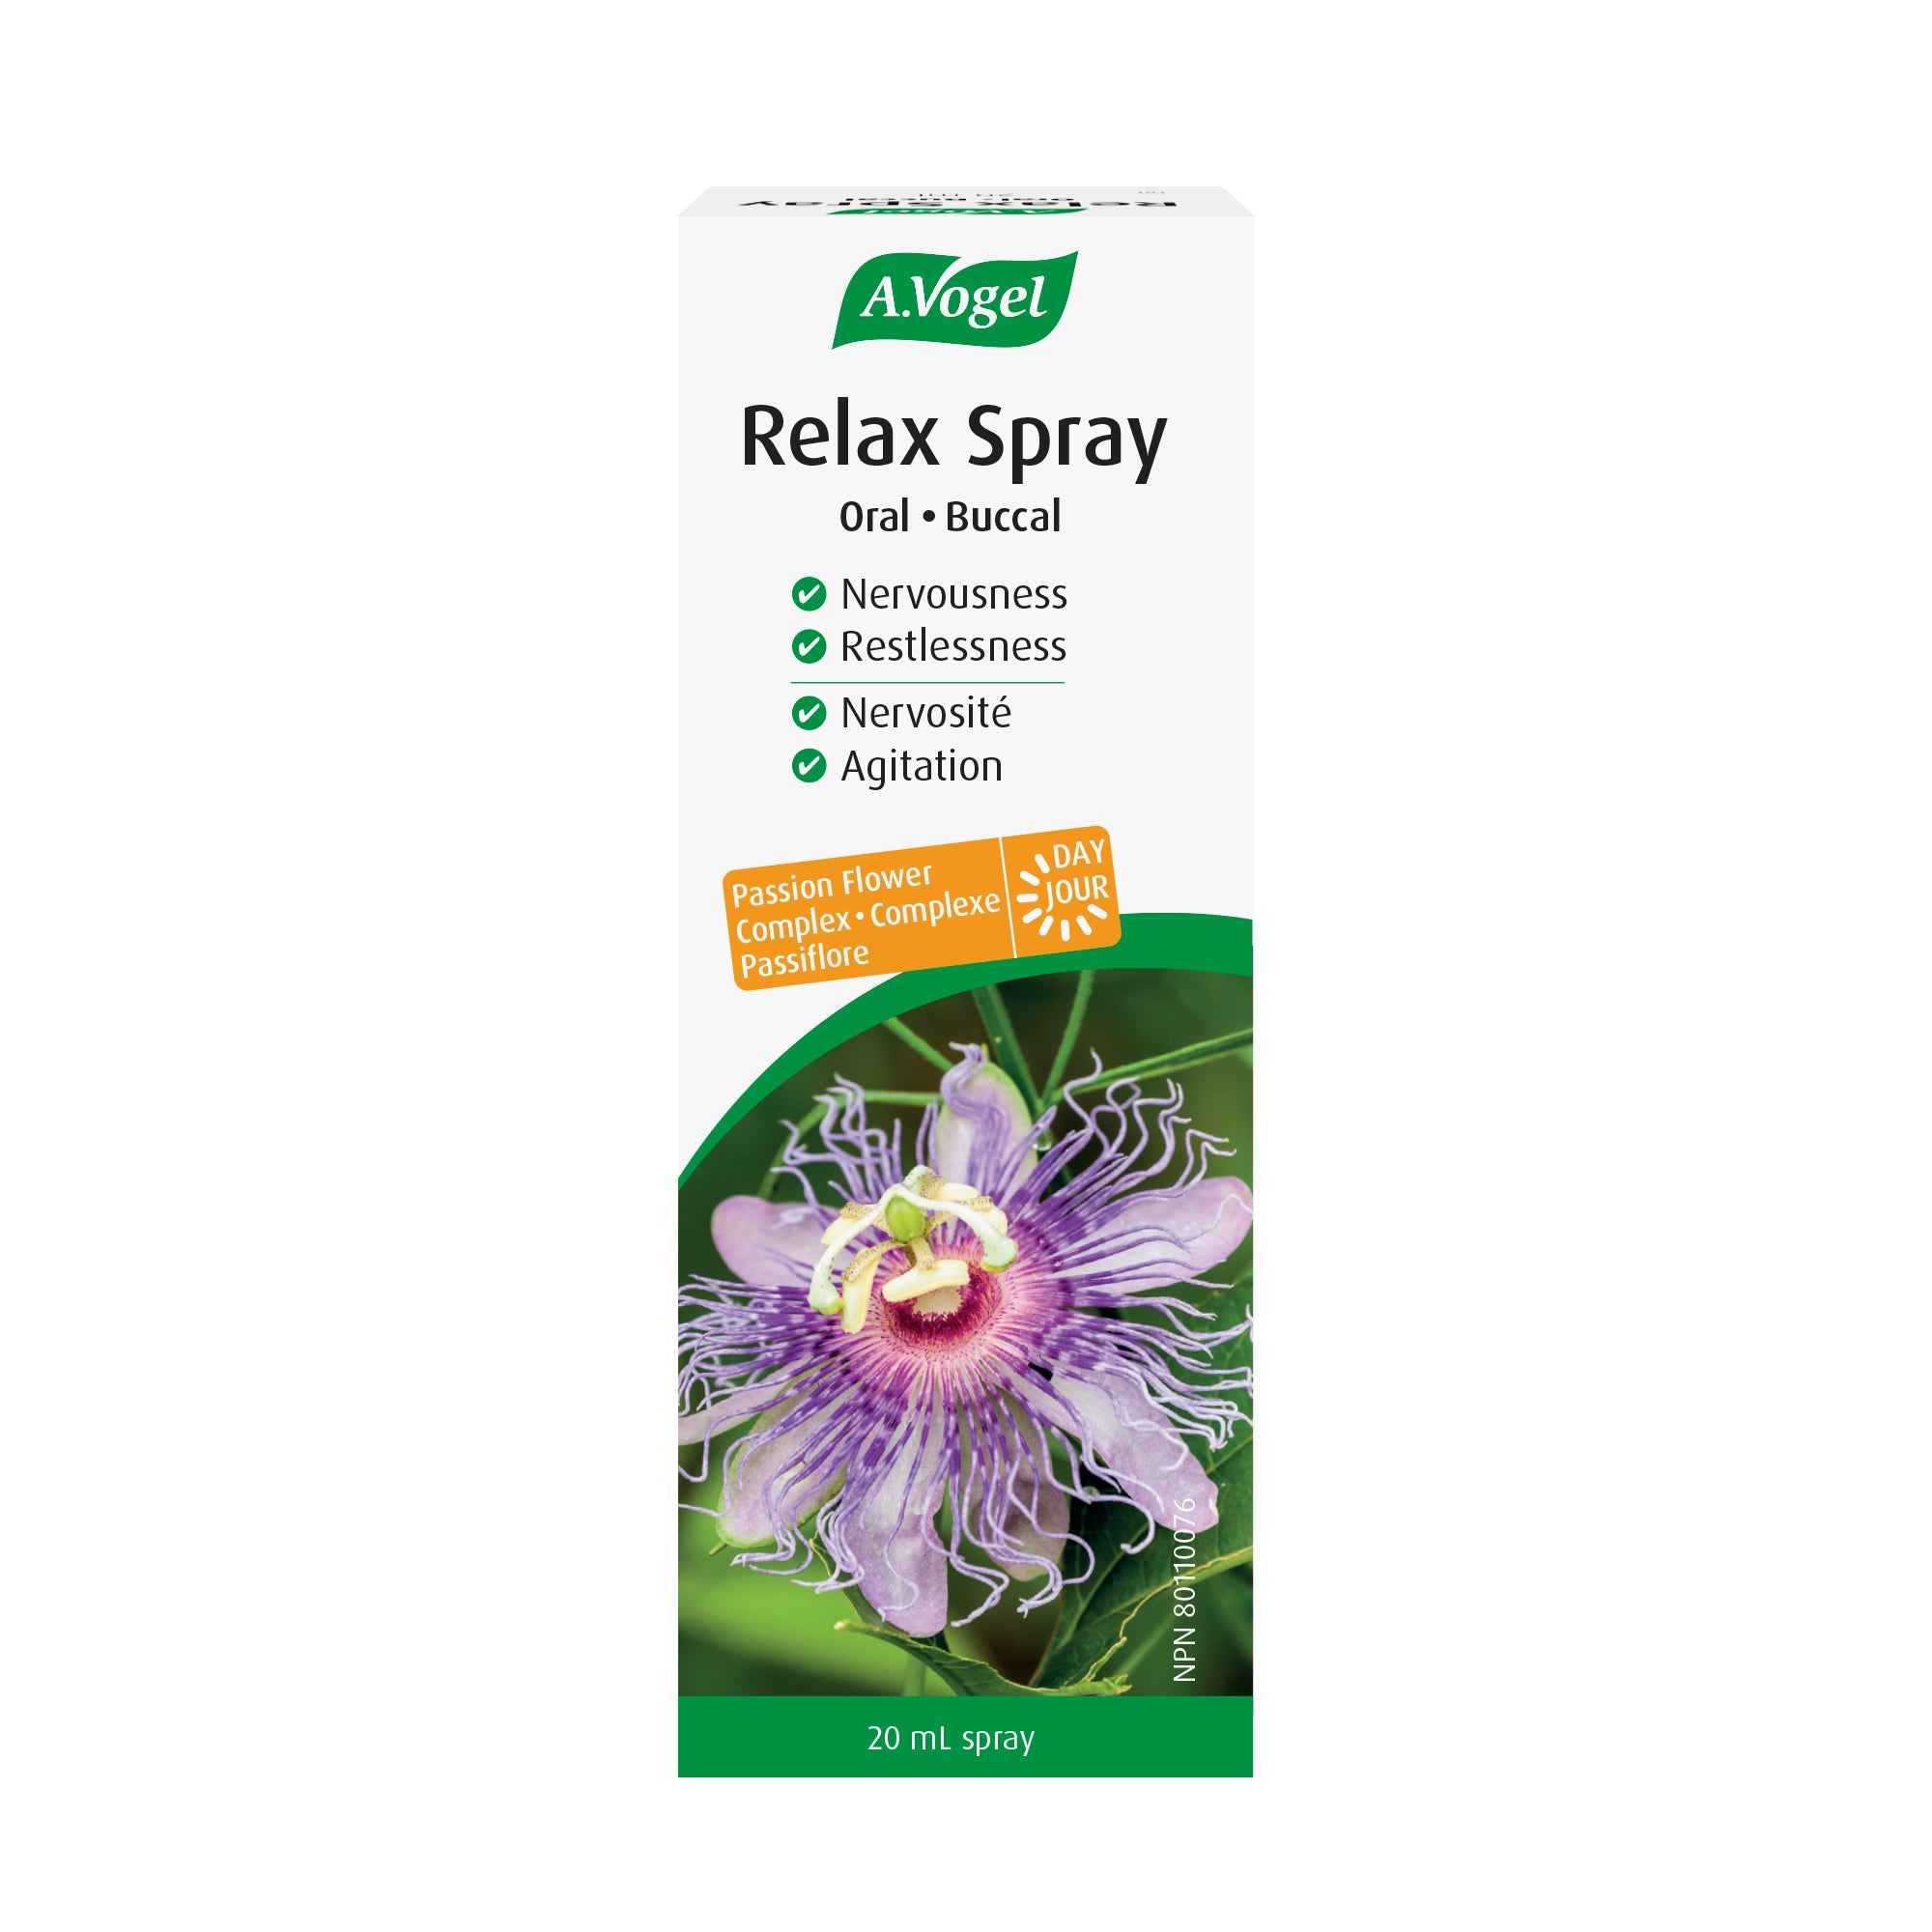 A.Vogel Relax Oral Spray - Fast Acting Stress Relief and Sleep Aid 20mL - A.Vogel Canada